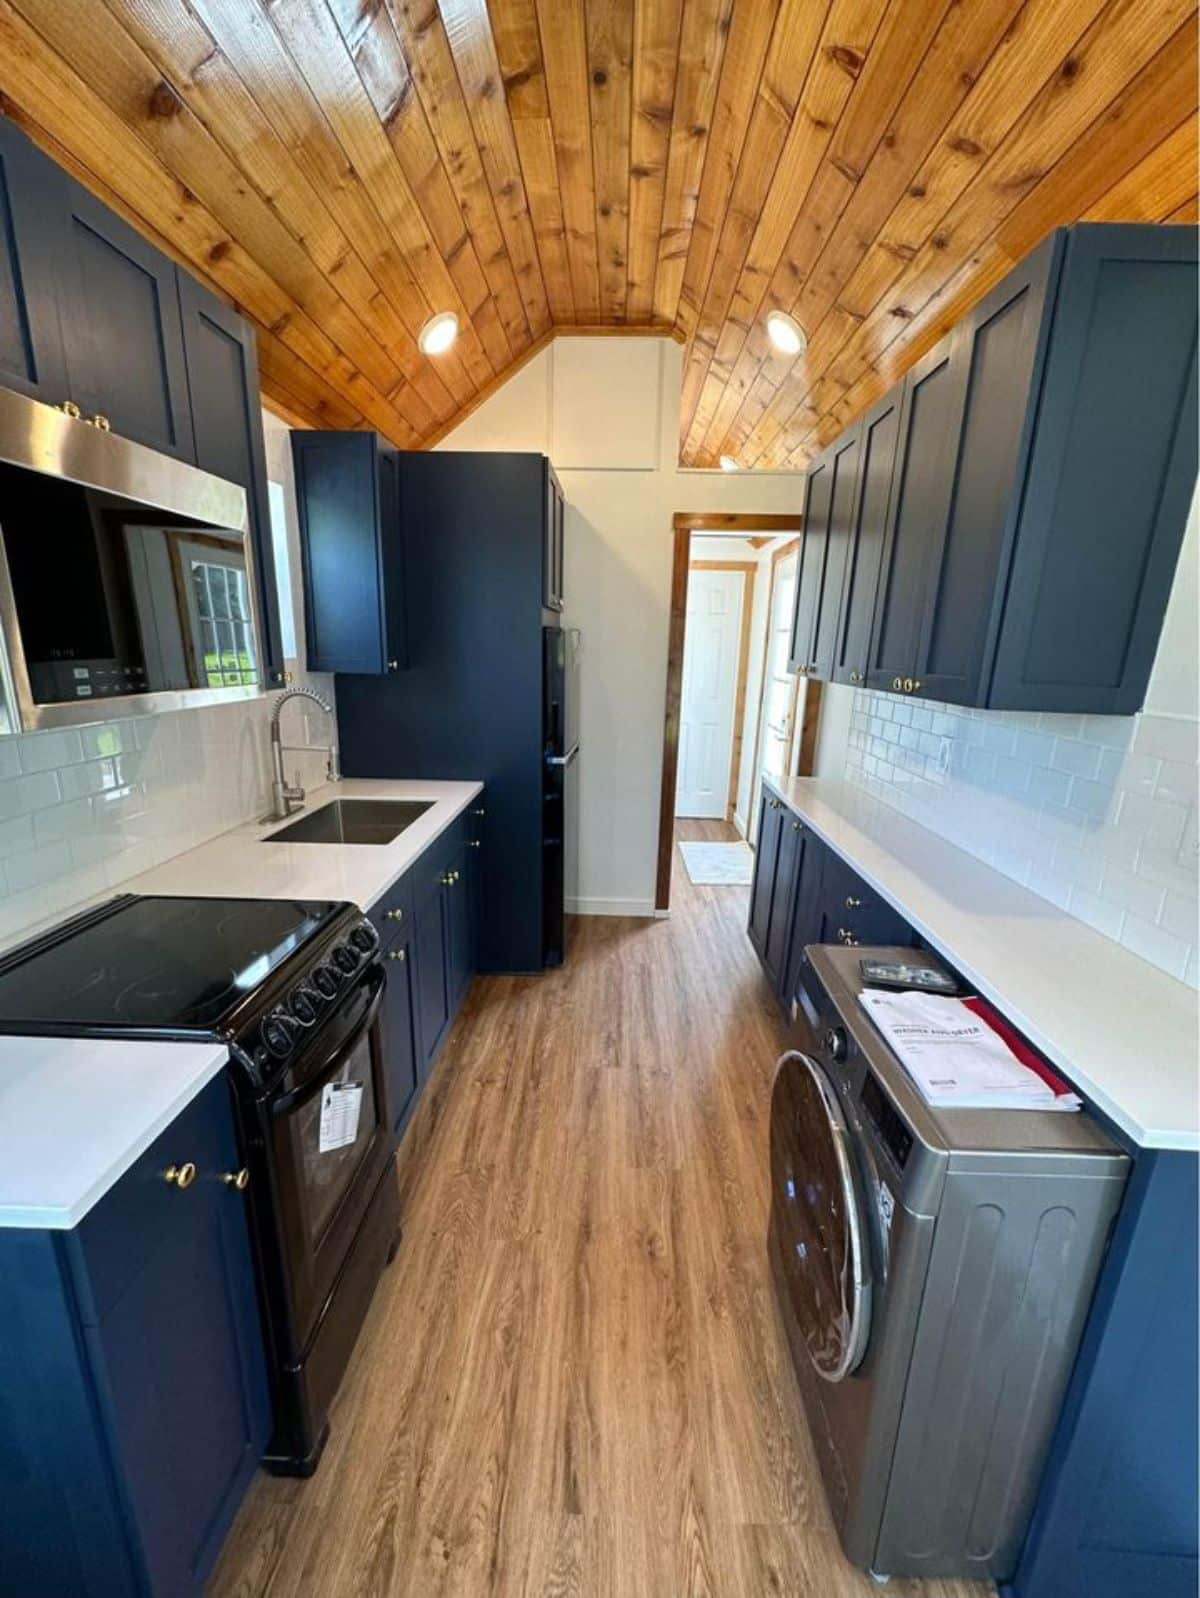 double galley kitchen area with washer dryer placed and storage cabinets